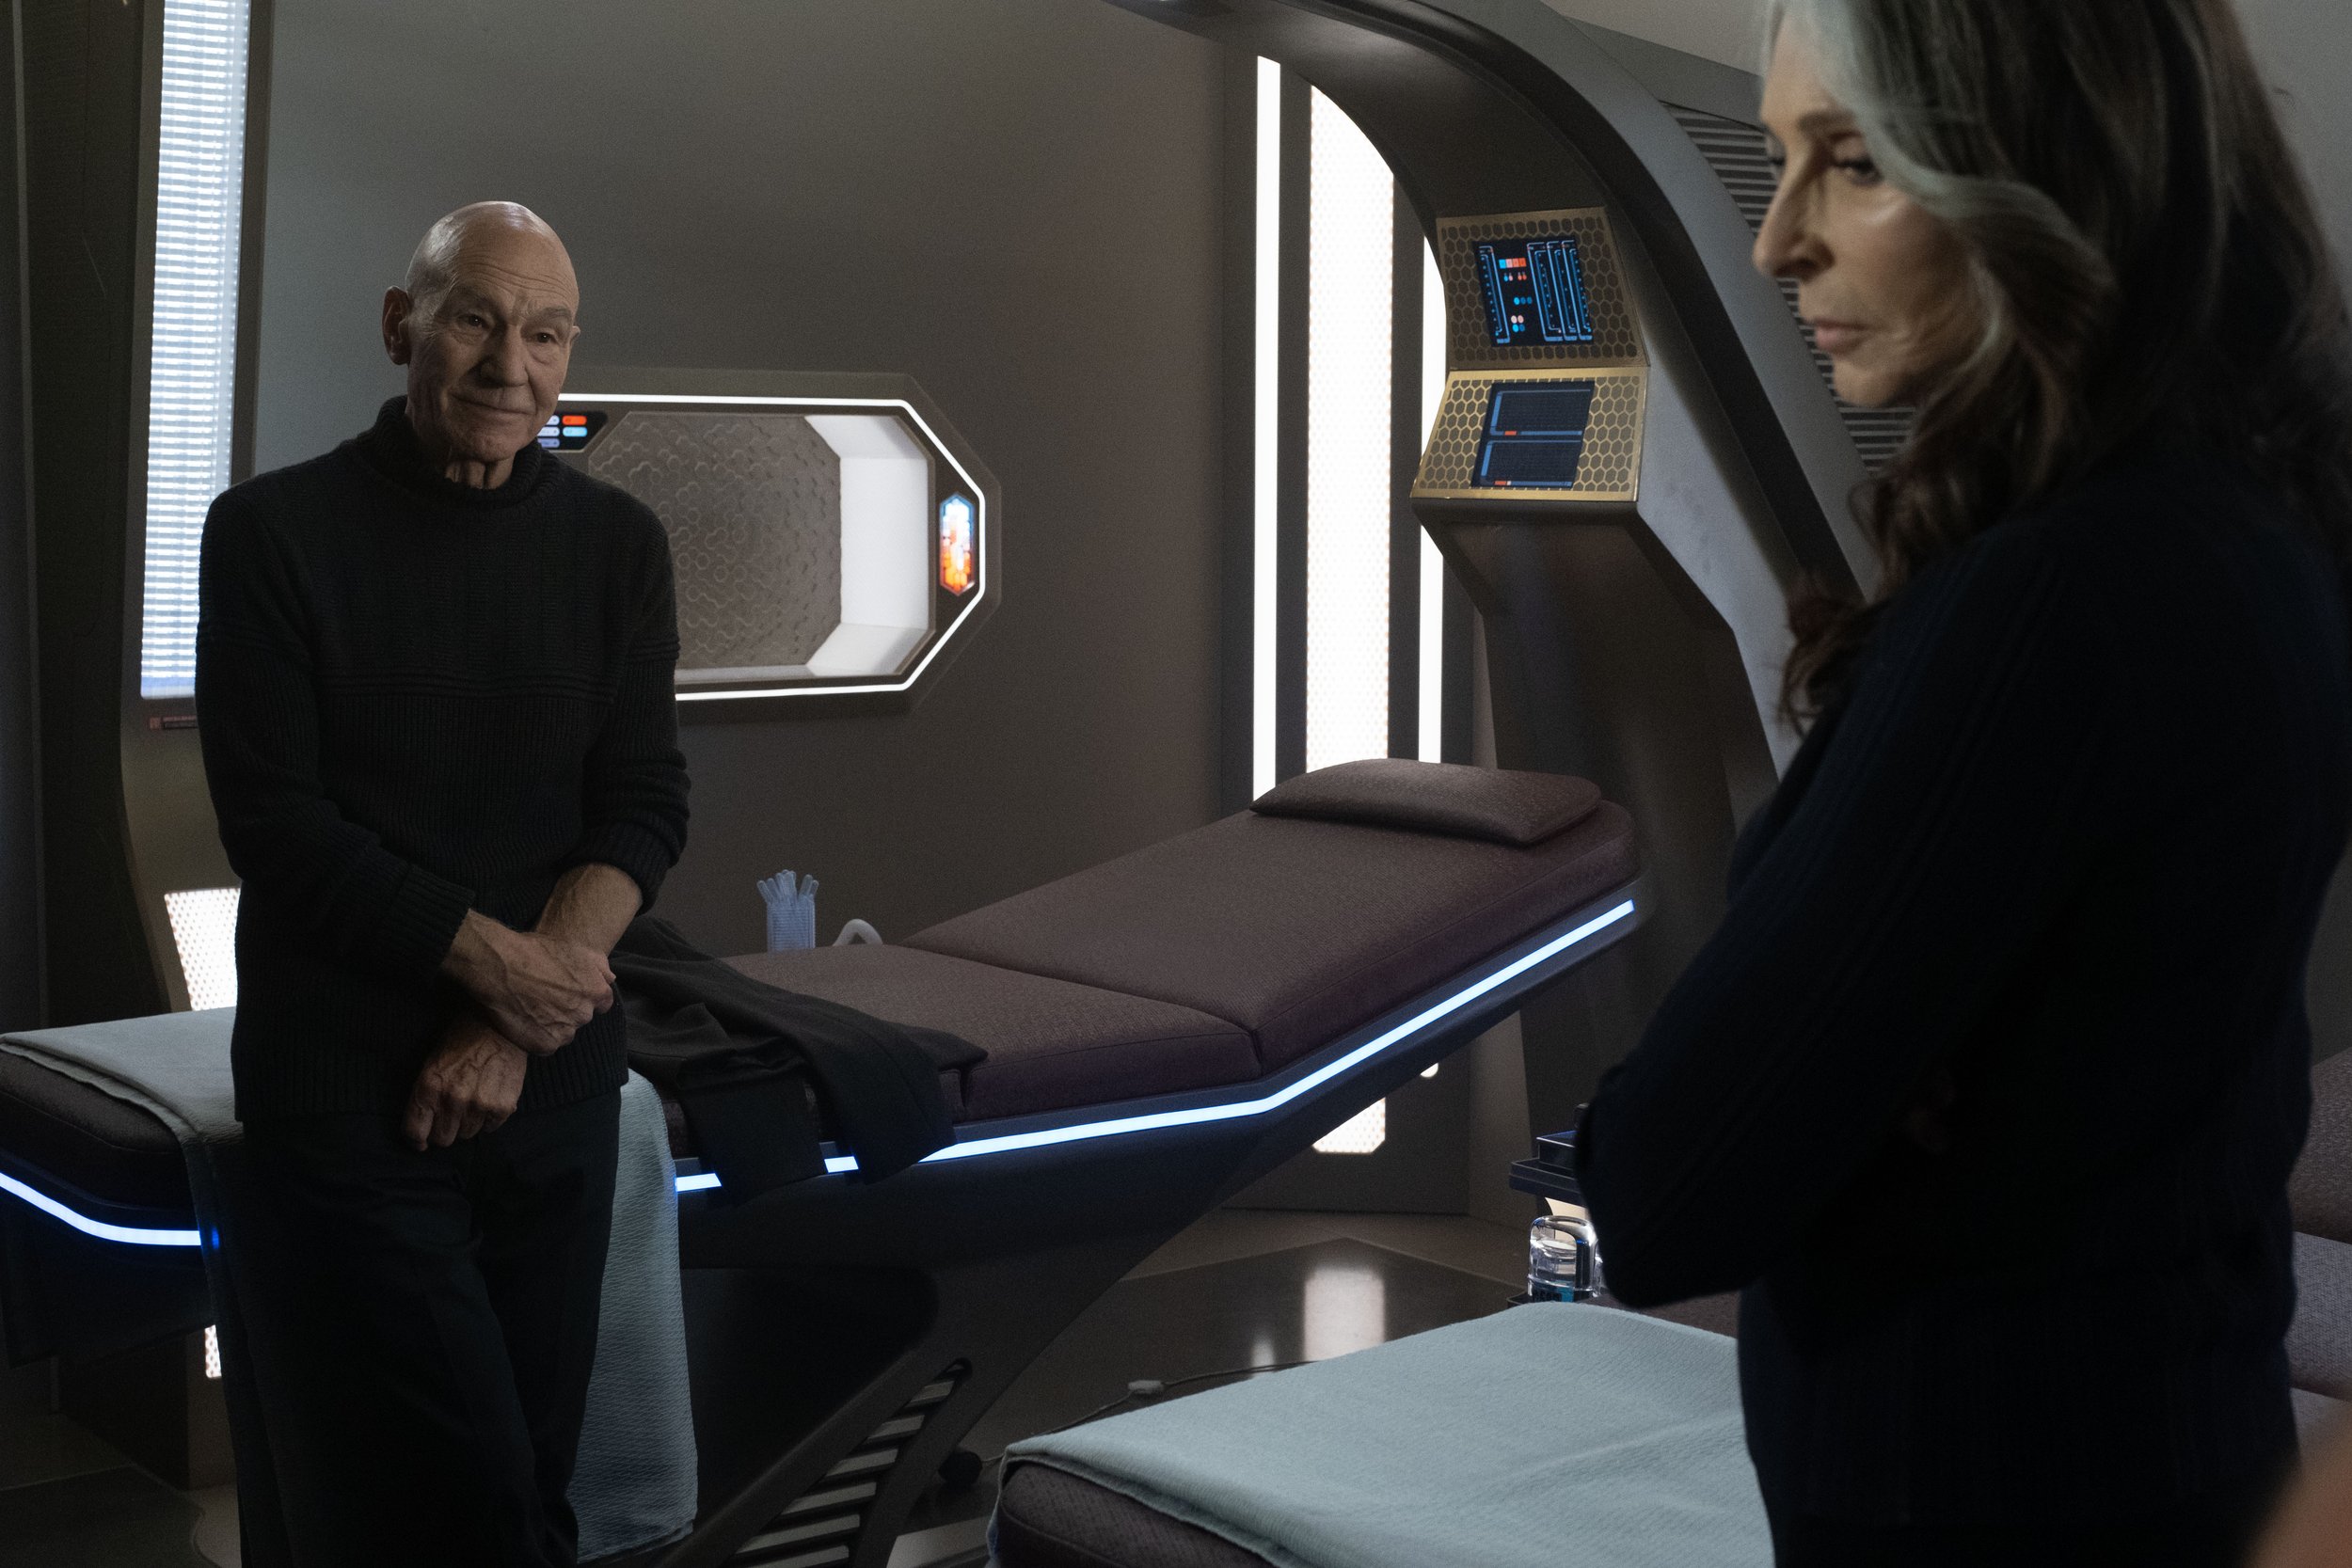   Patrick Stewart  as Picard and  Gates McFadden  as Dr. Beverly Crusher.  Photo Credit: Trae Patton/Paramount+.  